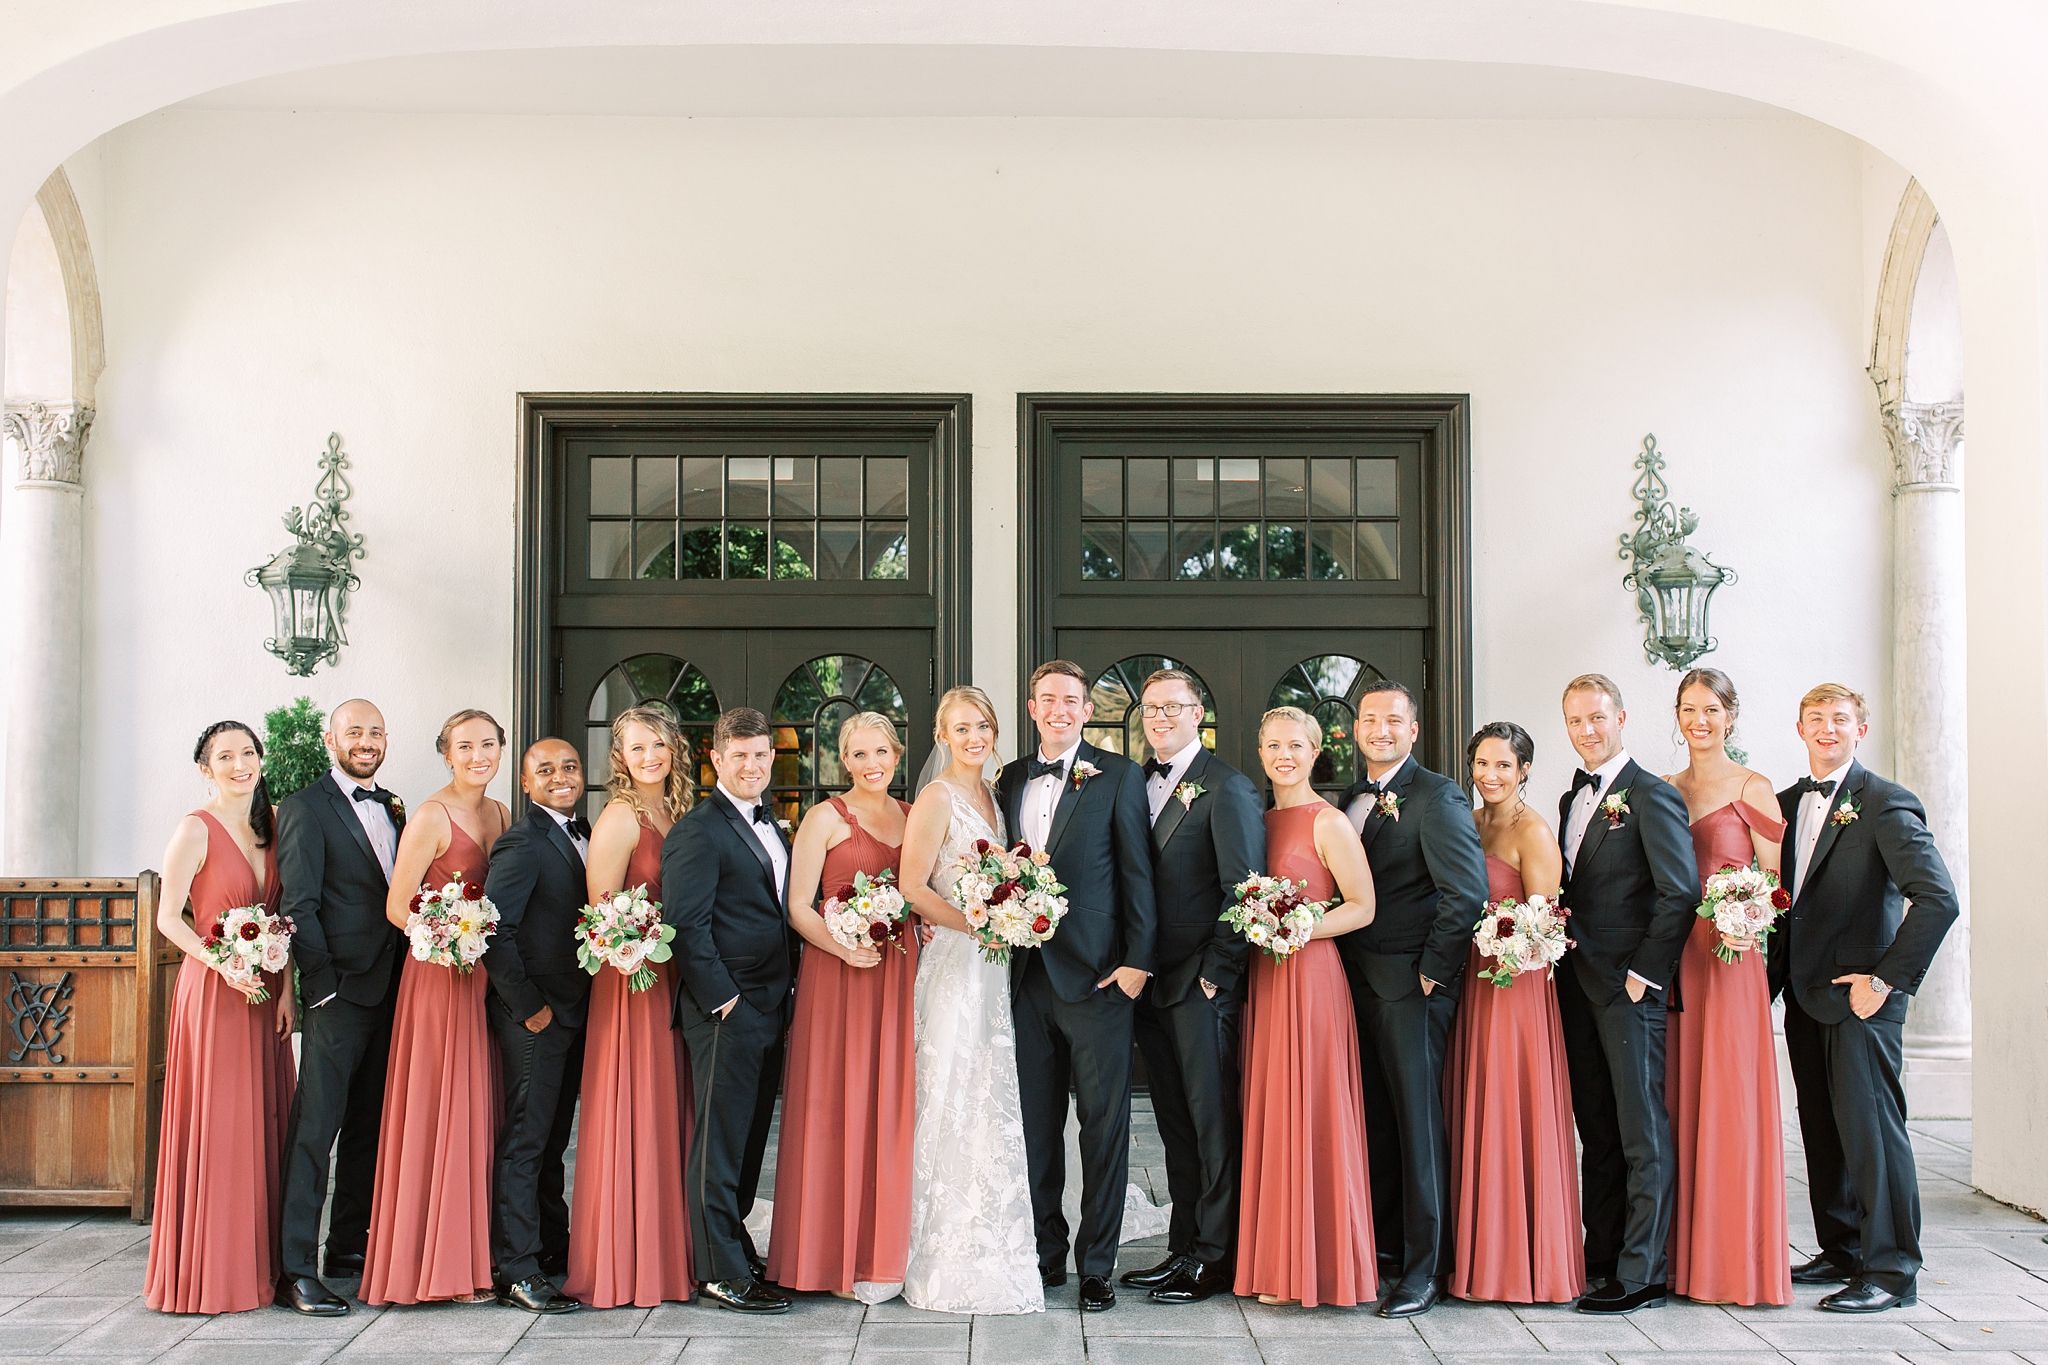 An elegant black tie wedding photographed by Alicia Lacey at the iconic Congressional Country Club in Bethesda, MD outside of Washington, DC.